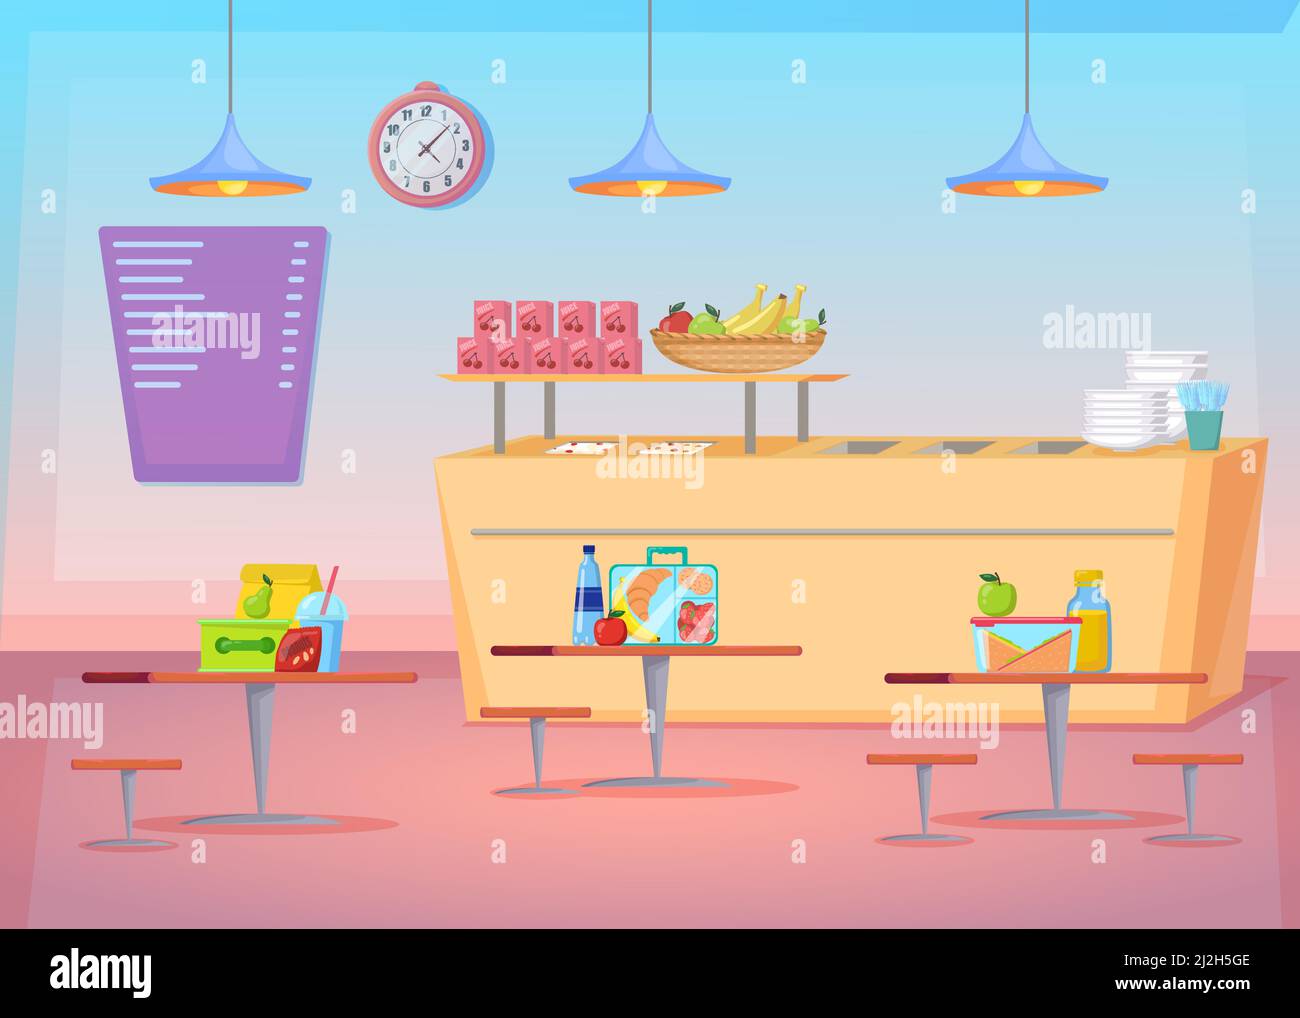 Cozy empty canteen interior cartoon illustration. Flat vector picture of cafe space with healthy food on tables, chairs, menu. Can be used for restaur Stock Vector